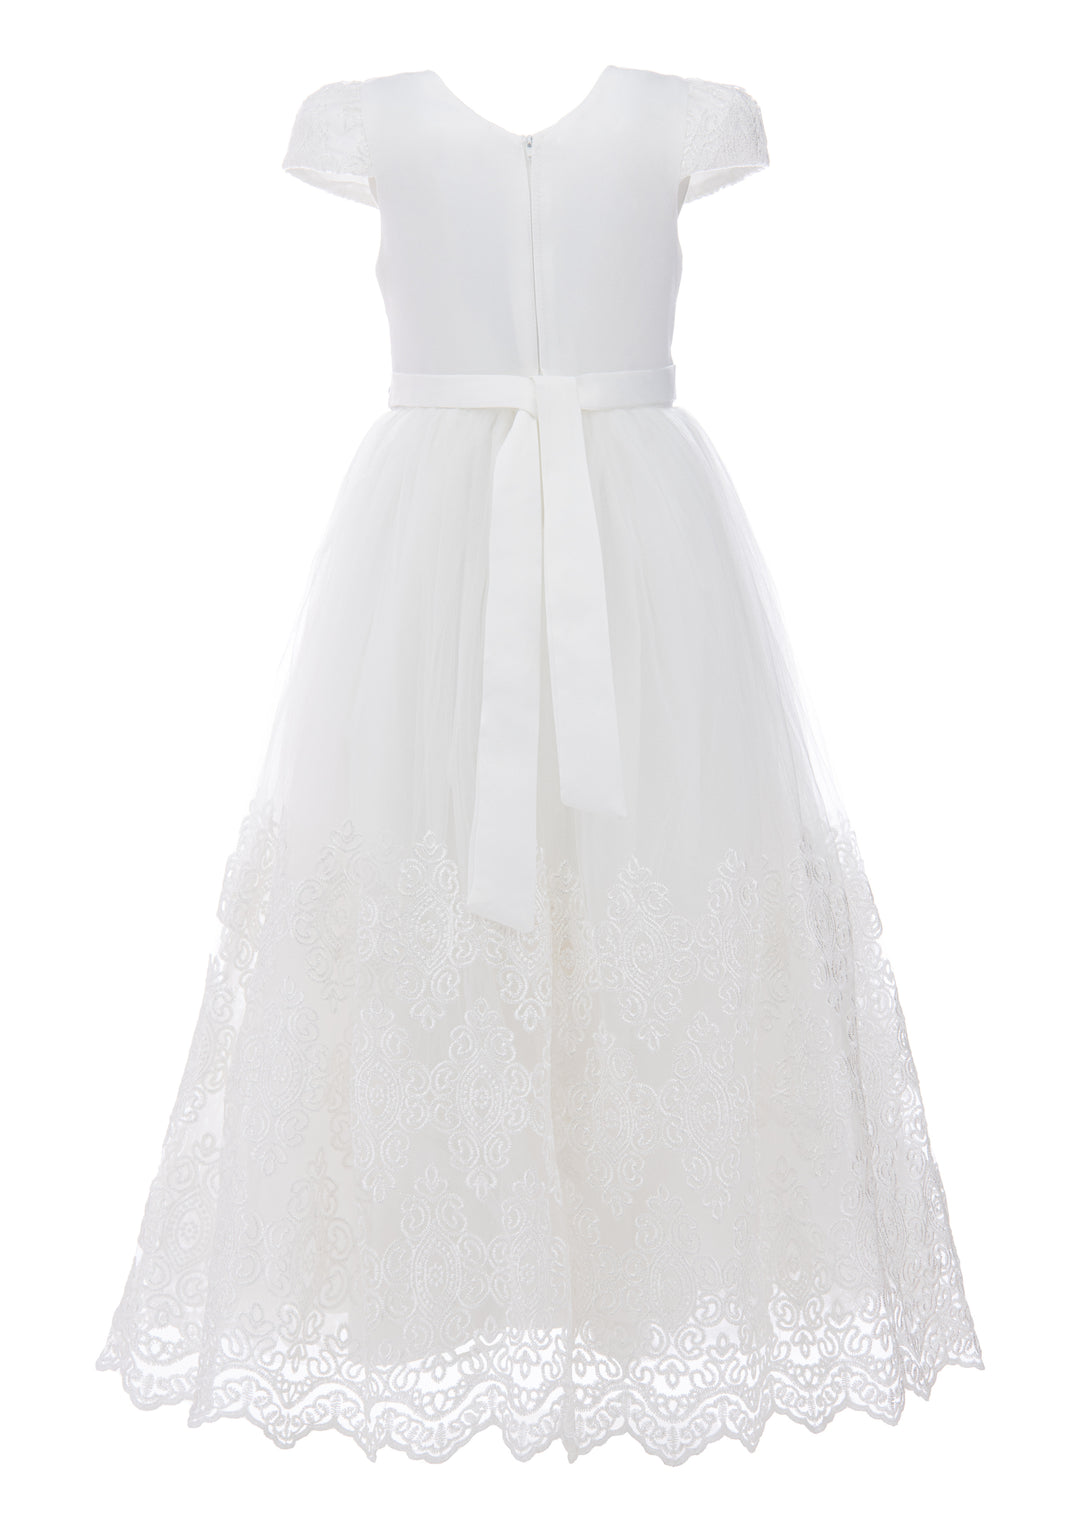 kids-atelier-tulleen-kid-girl-white-beaumont-teacup-gown-tcc6701